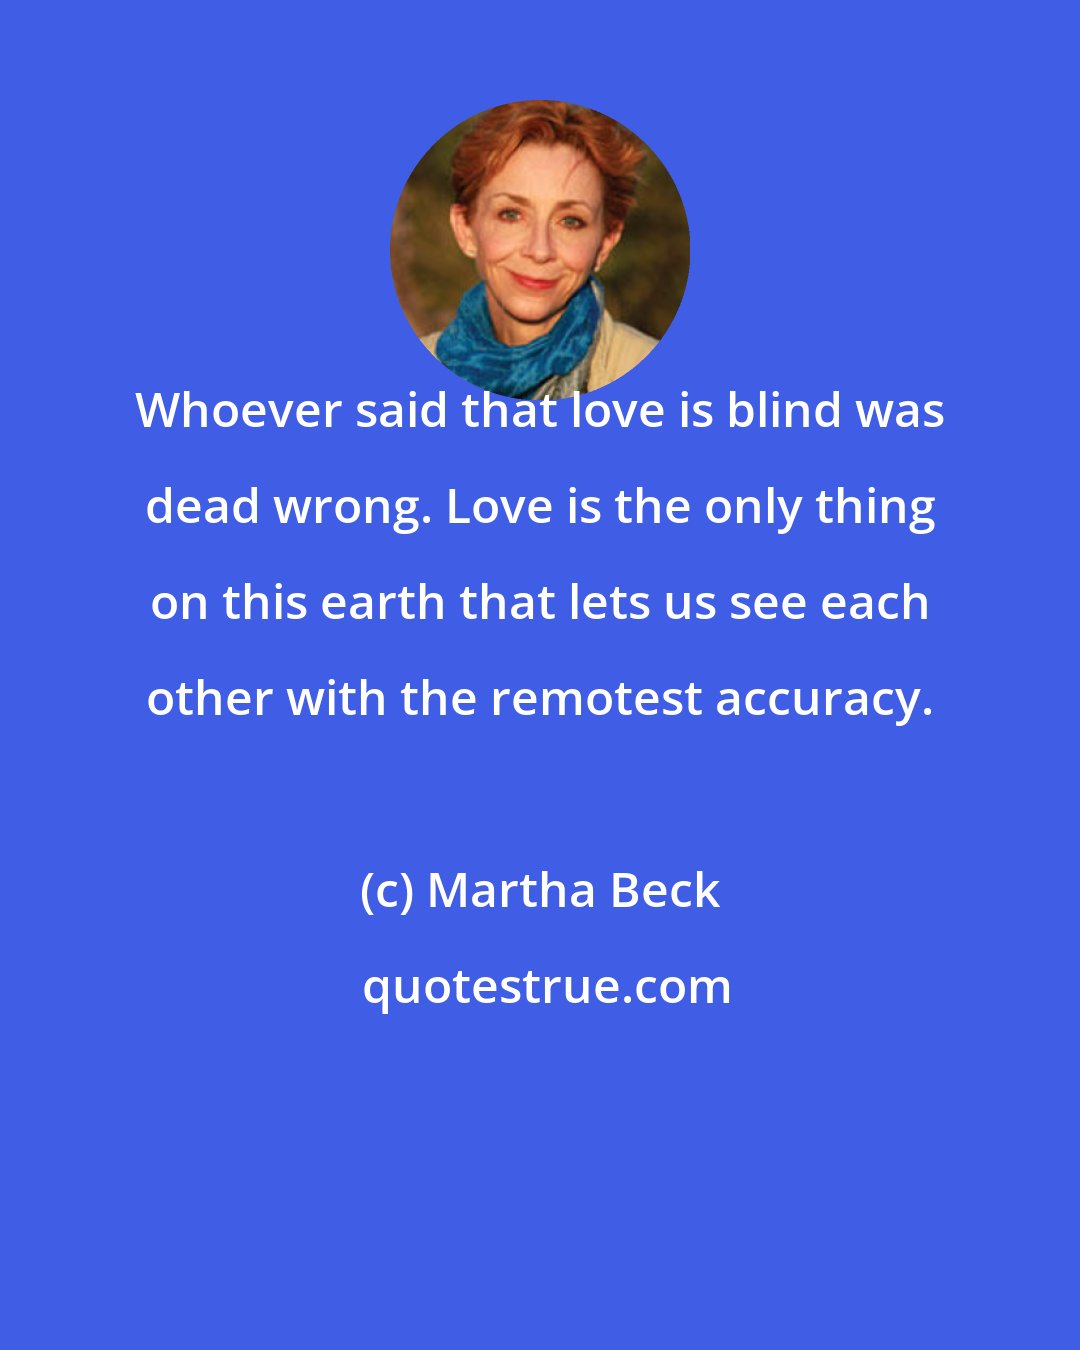 Martha Beck: Whoever said that love is blind was dead wrong. Love is the only thing on this earth that lets us see each other with the remotest accuracy.